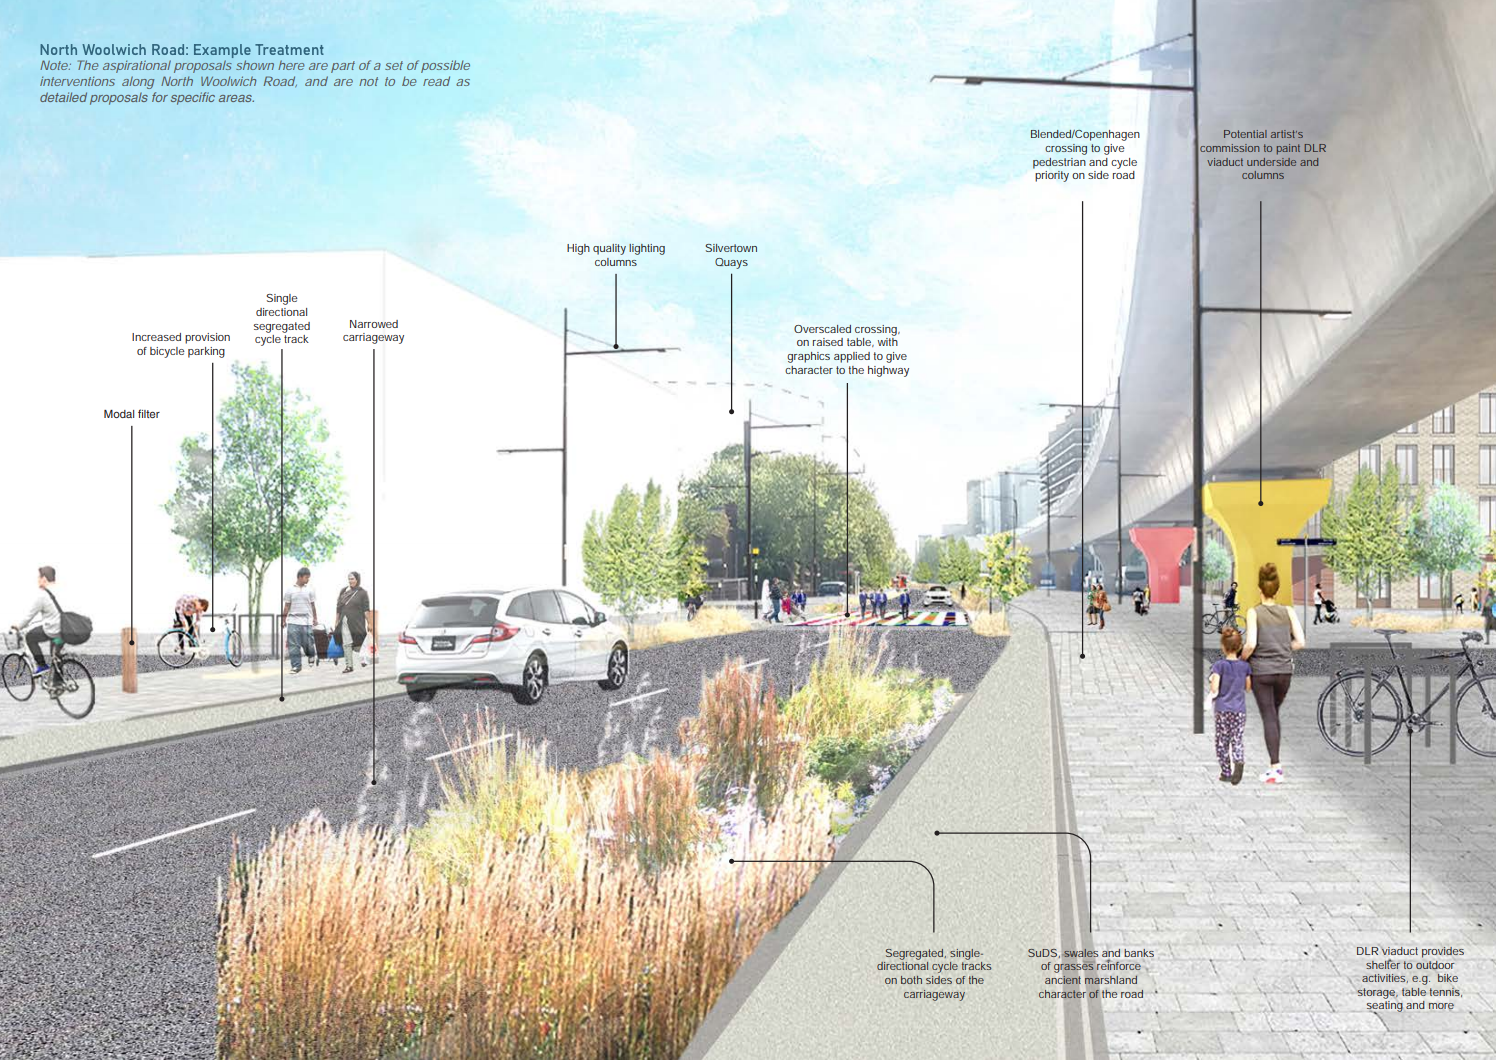 Images from the Royal Docks public realm framework